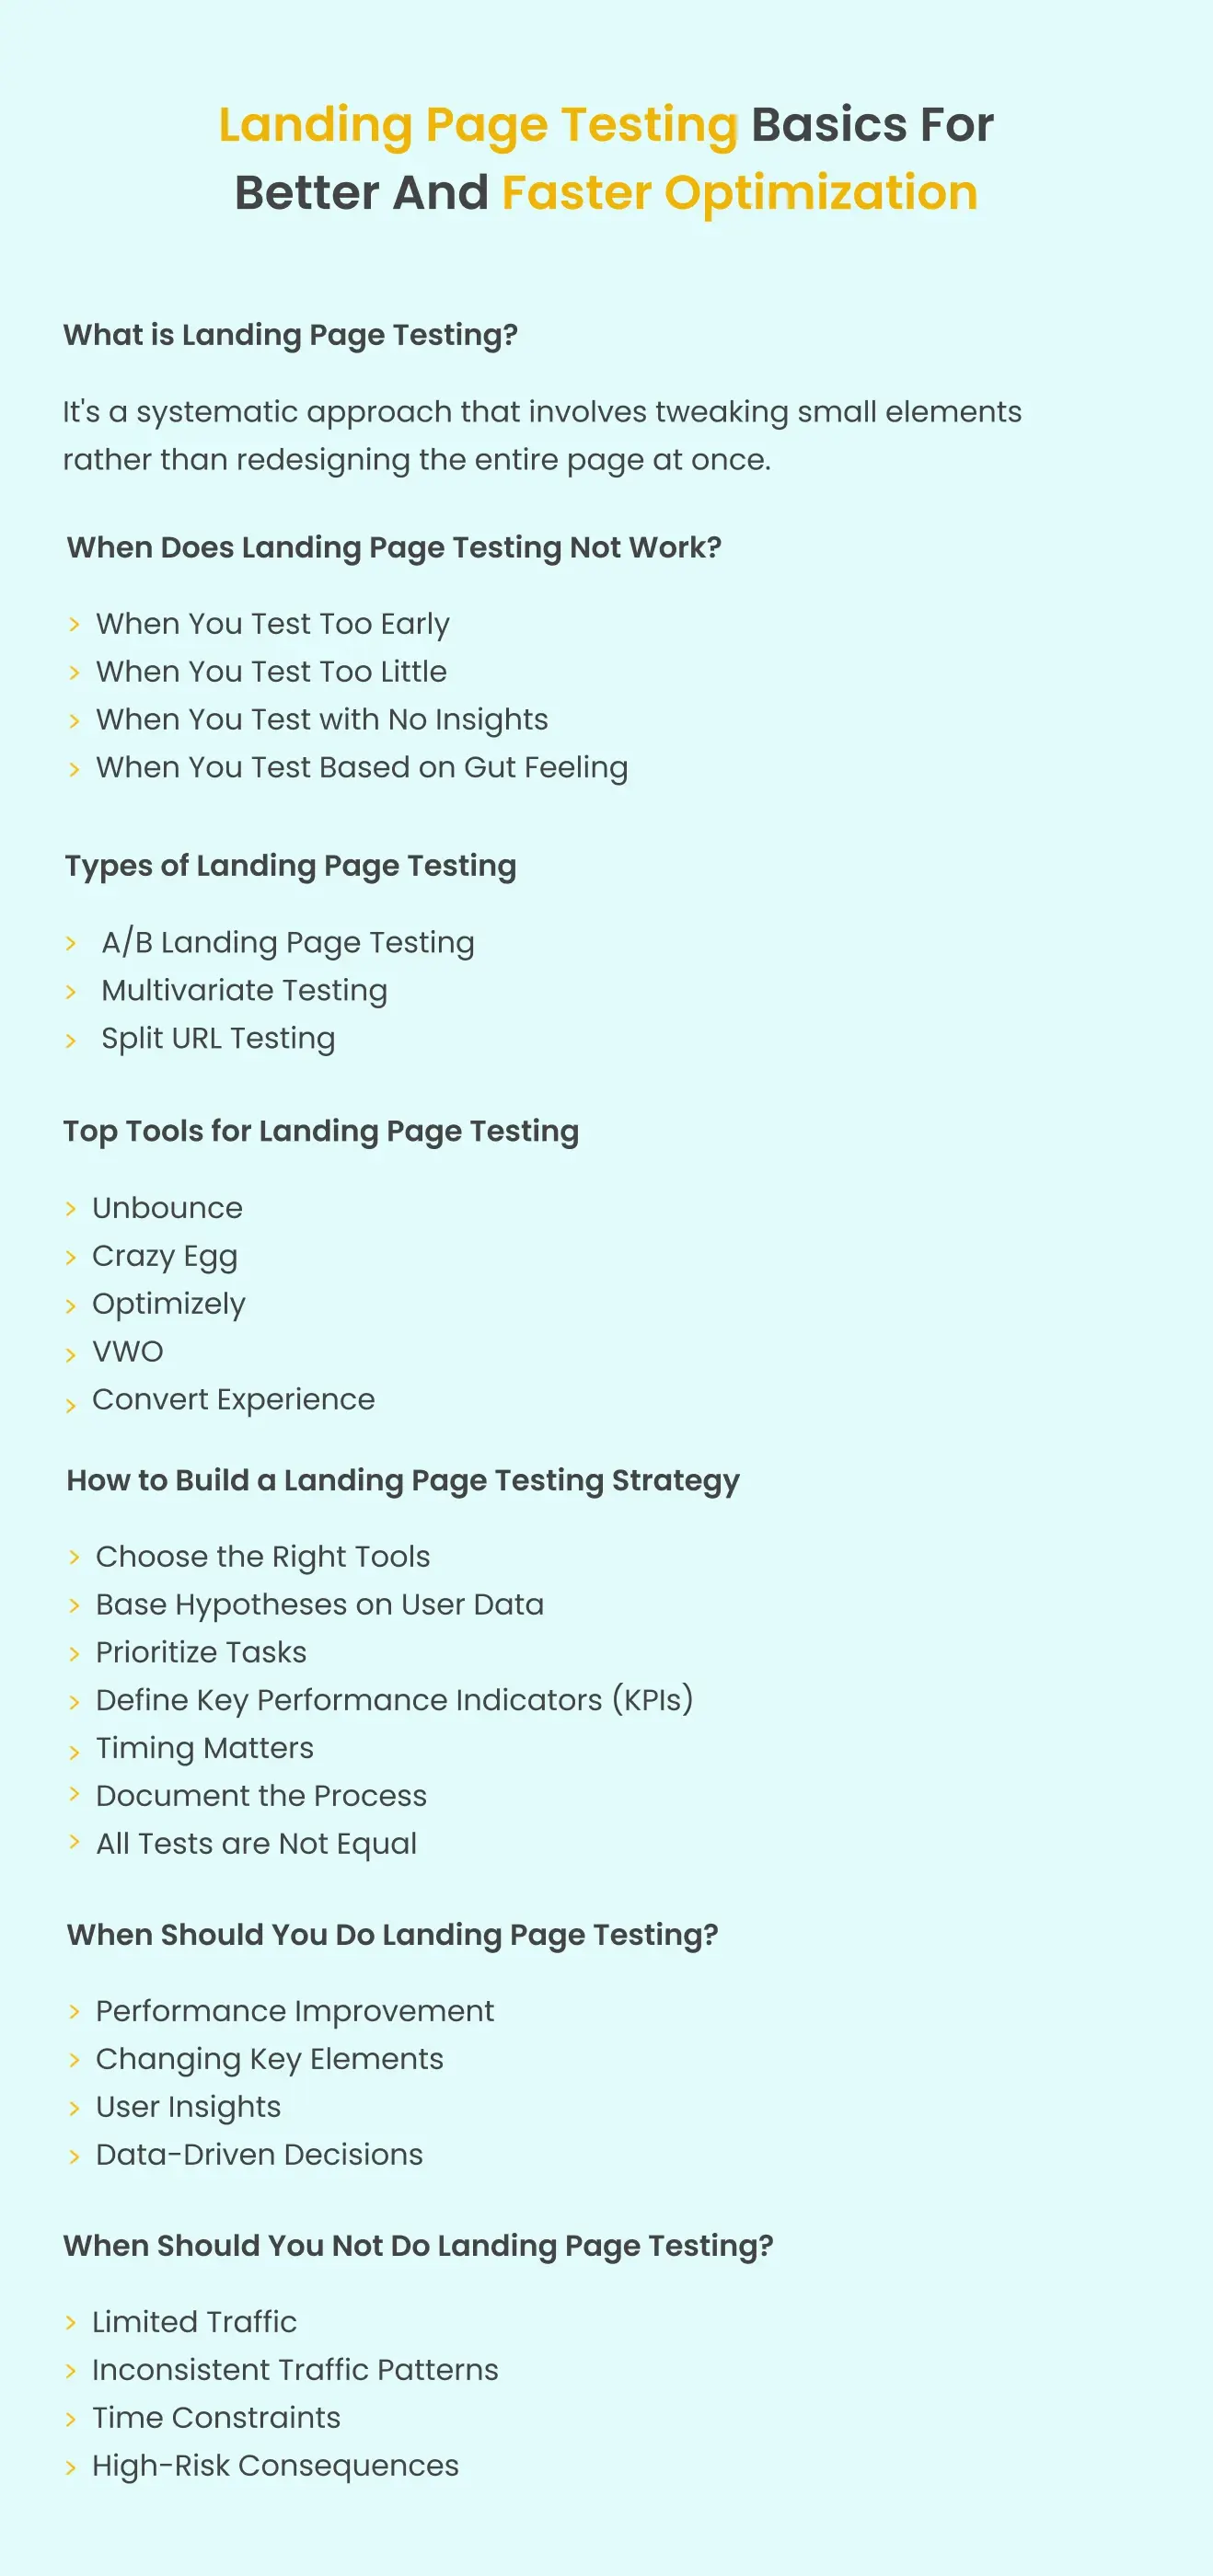 Landing-Page-Testing-Basics-For-Better-And-Faster-Optimization-Summary.webp